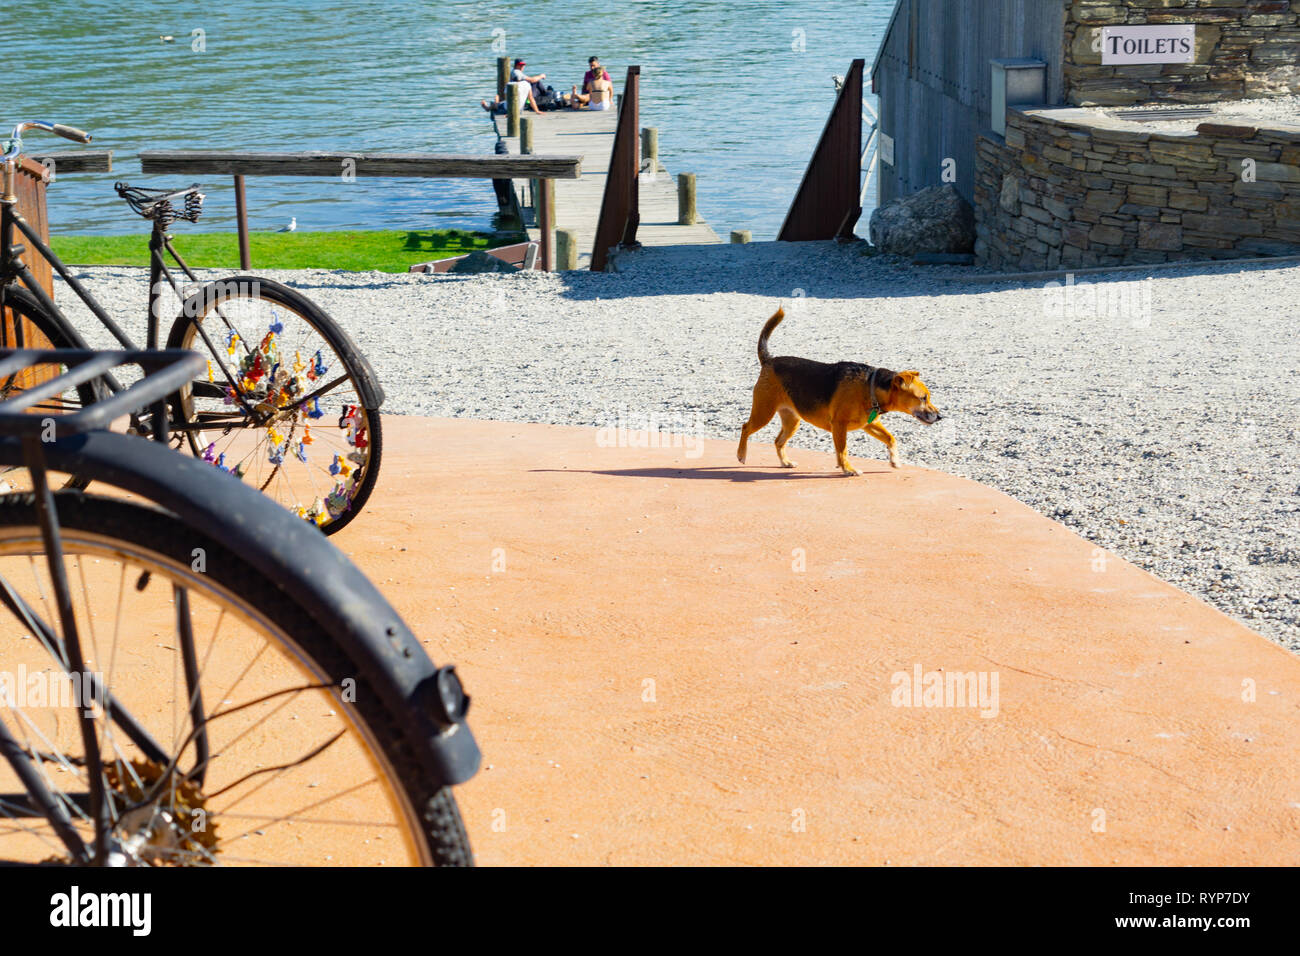 CROMWELL, NEW ZEALAND - OCTOBER 21 2019; Old bicyle wheels and dog crossing sstreet in small town with group four youth in distance on jetty on Lake D Stock Photo